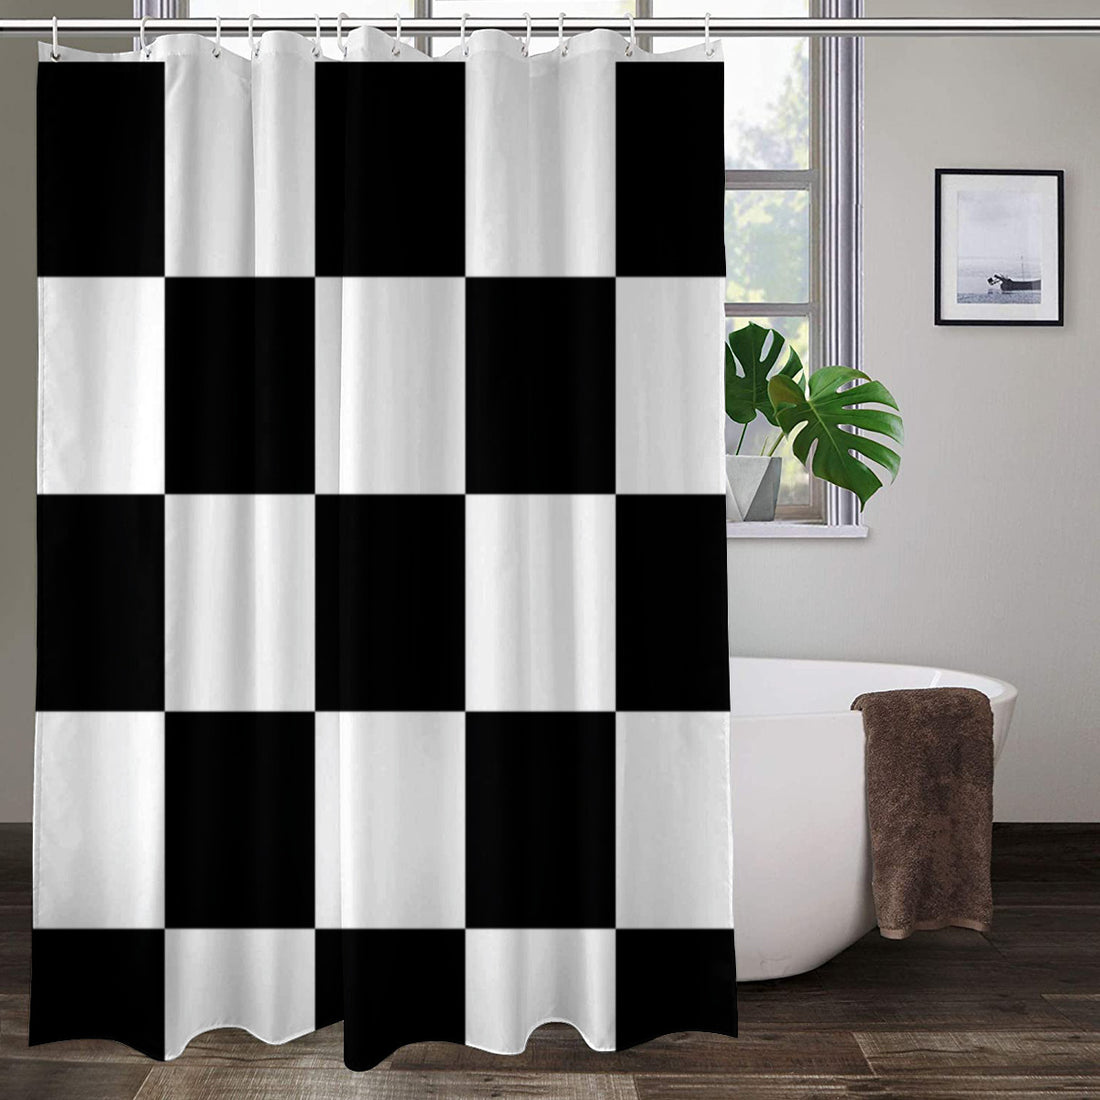 Shower Curtain black and white Home-clothes-jewelry